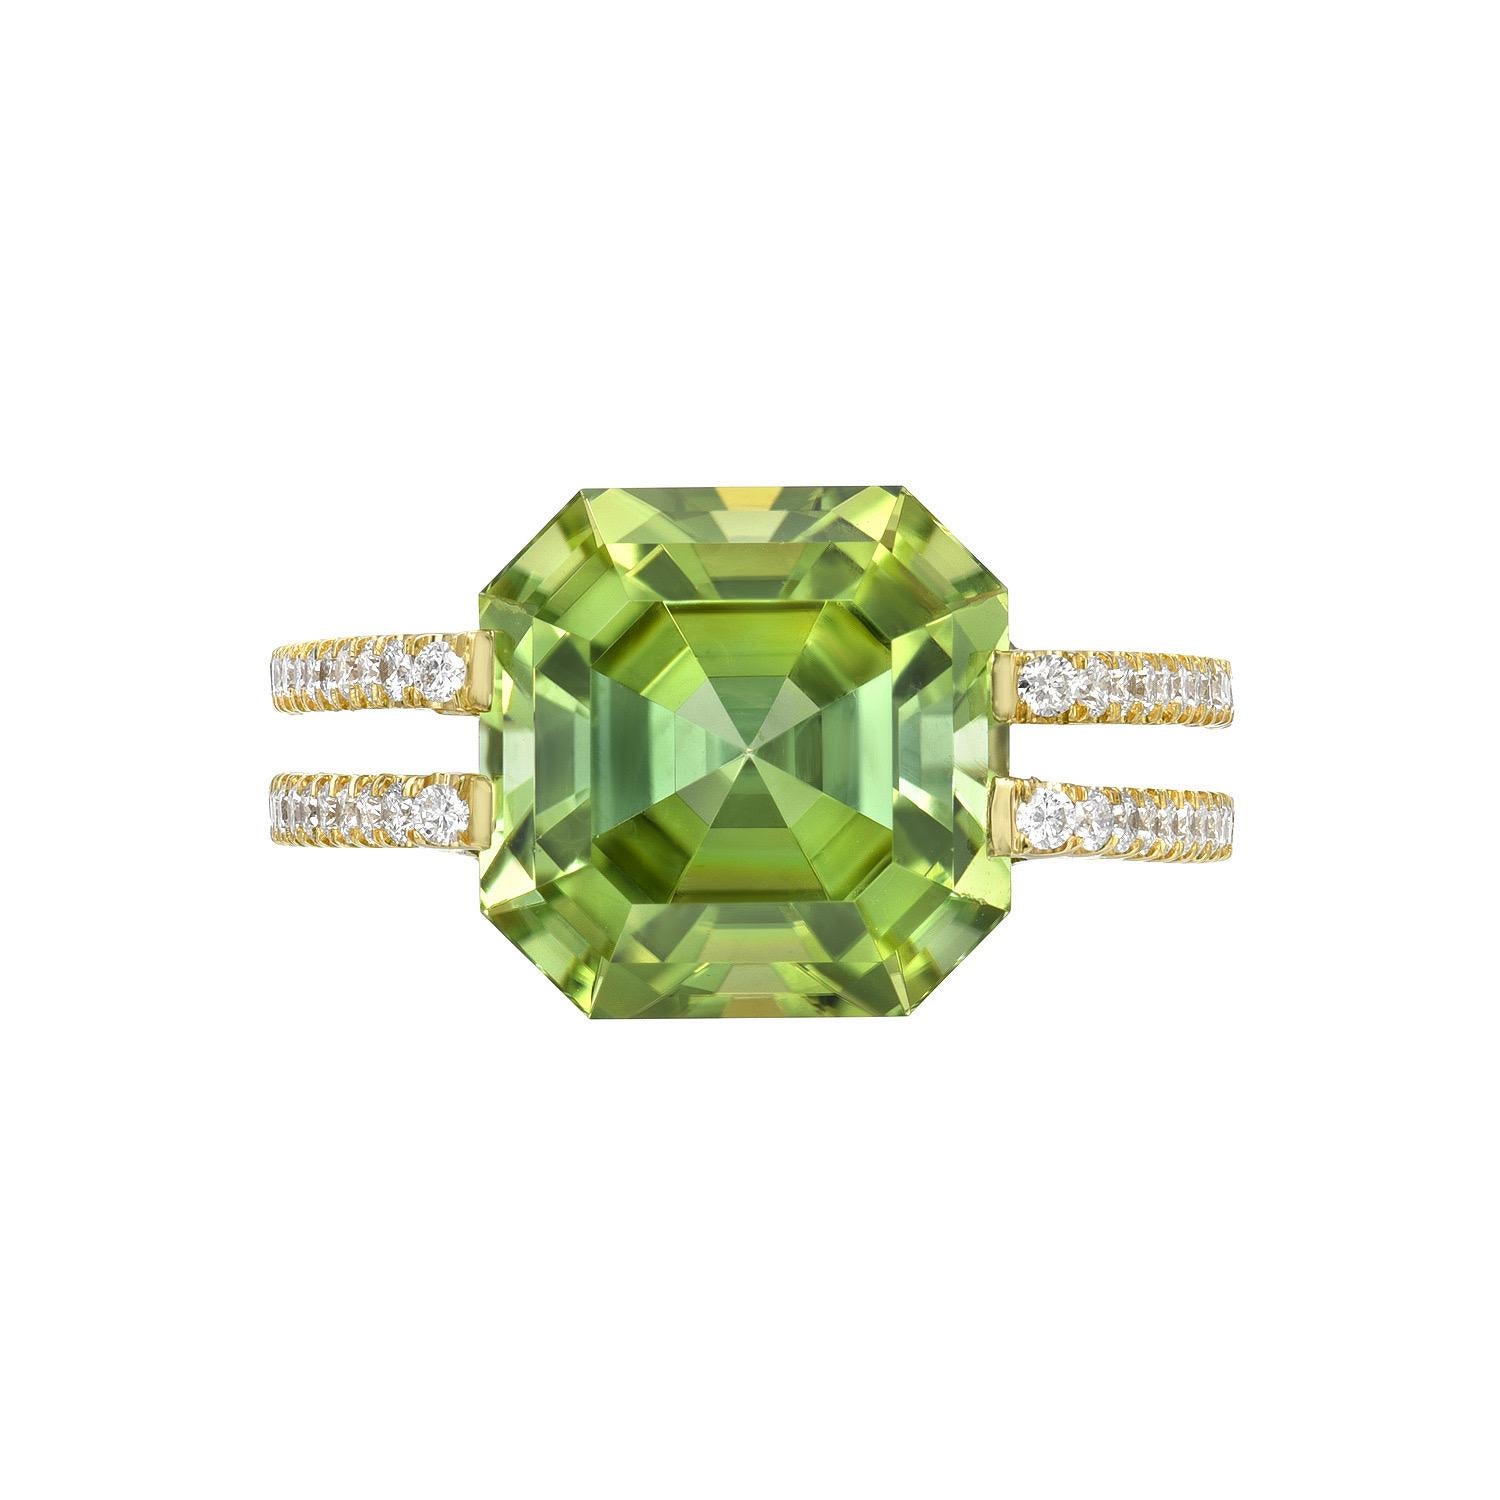 Contemporary Mint Green Tourmaline Ring 7.54 Carat Square Emerald Cut For Sale